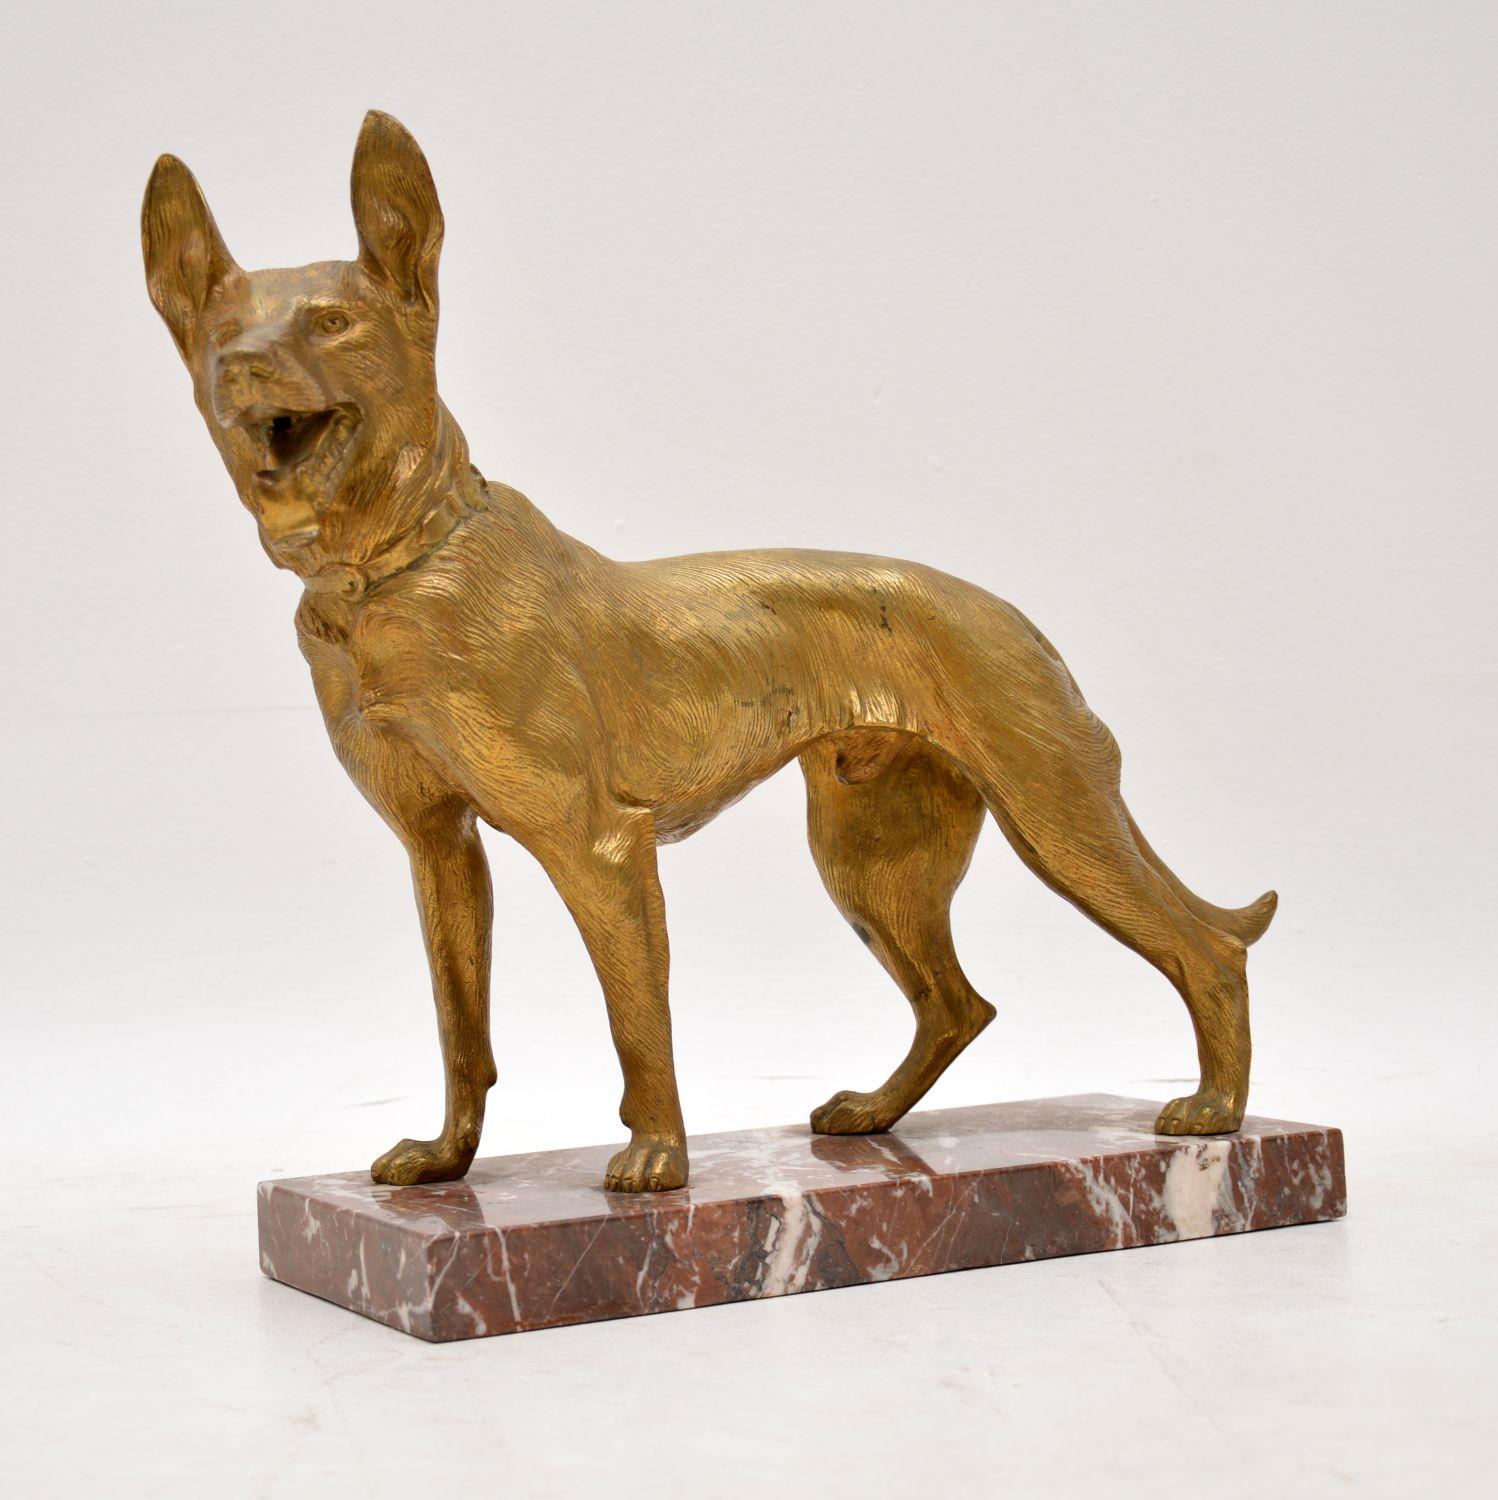 Large antique gilt bronze sculpture of an Alsatian dog by Robert Bousquet and dating from circa 1910 period.

It’s a very life like bronze and has the famous sculpture signature engraved on the dog collar. This gilt bronze is in excellent original